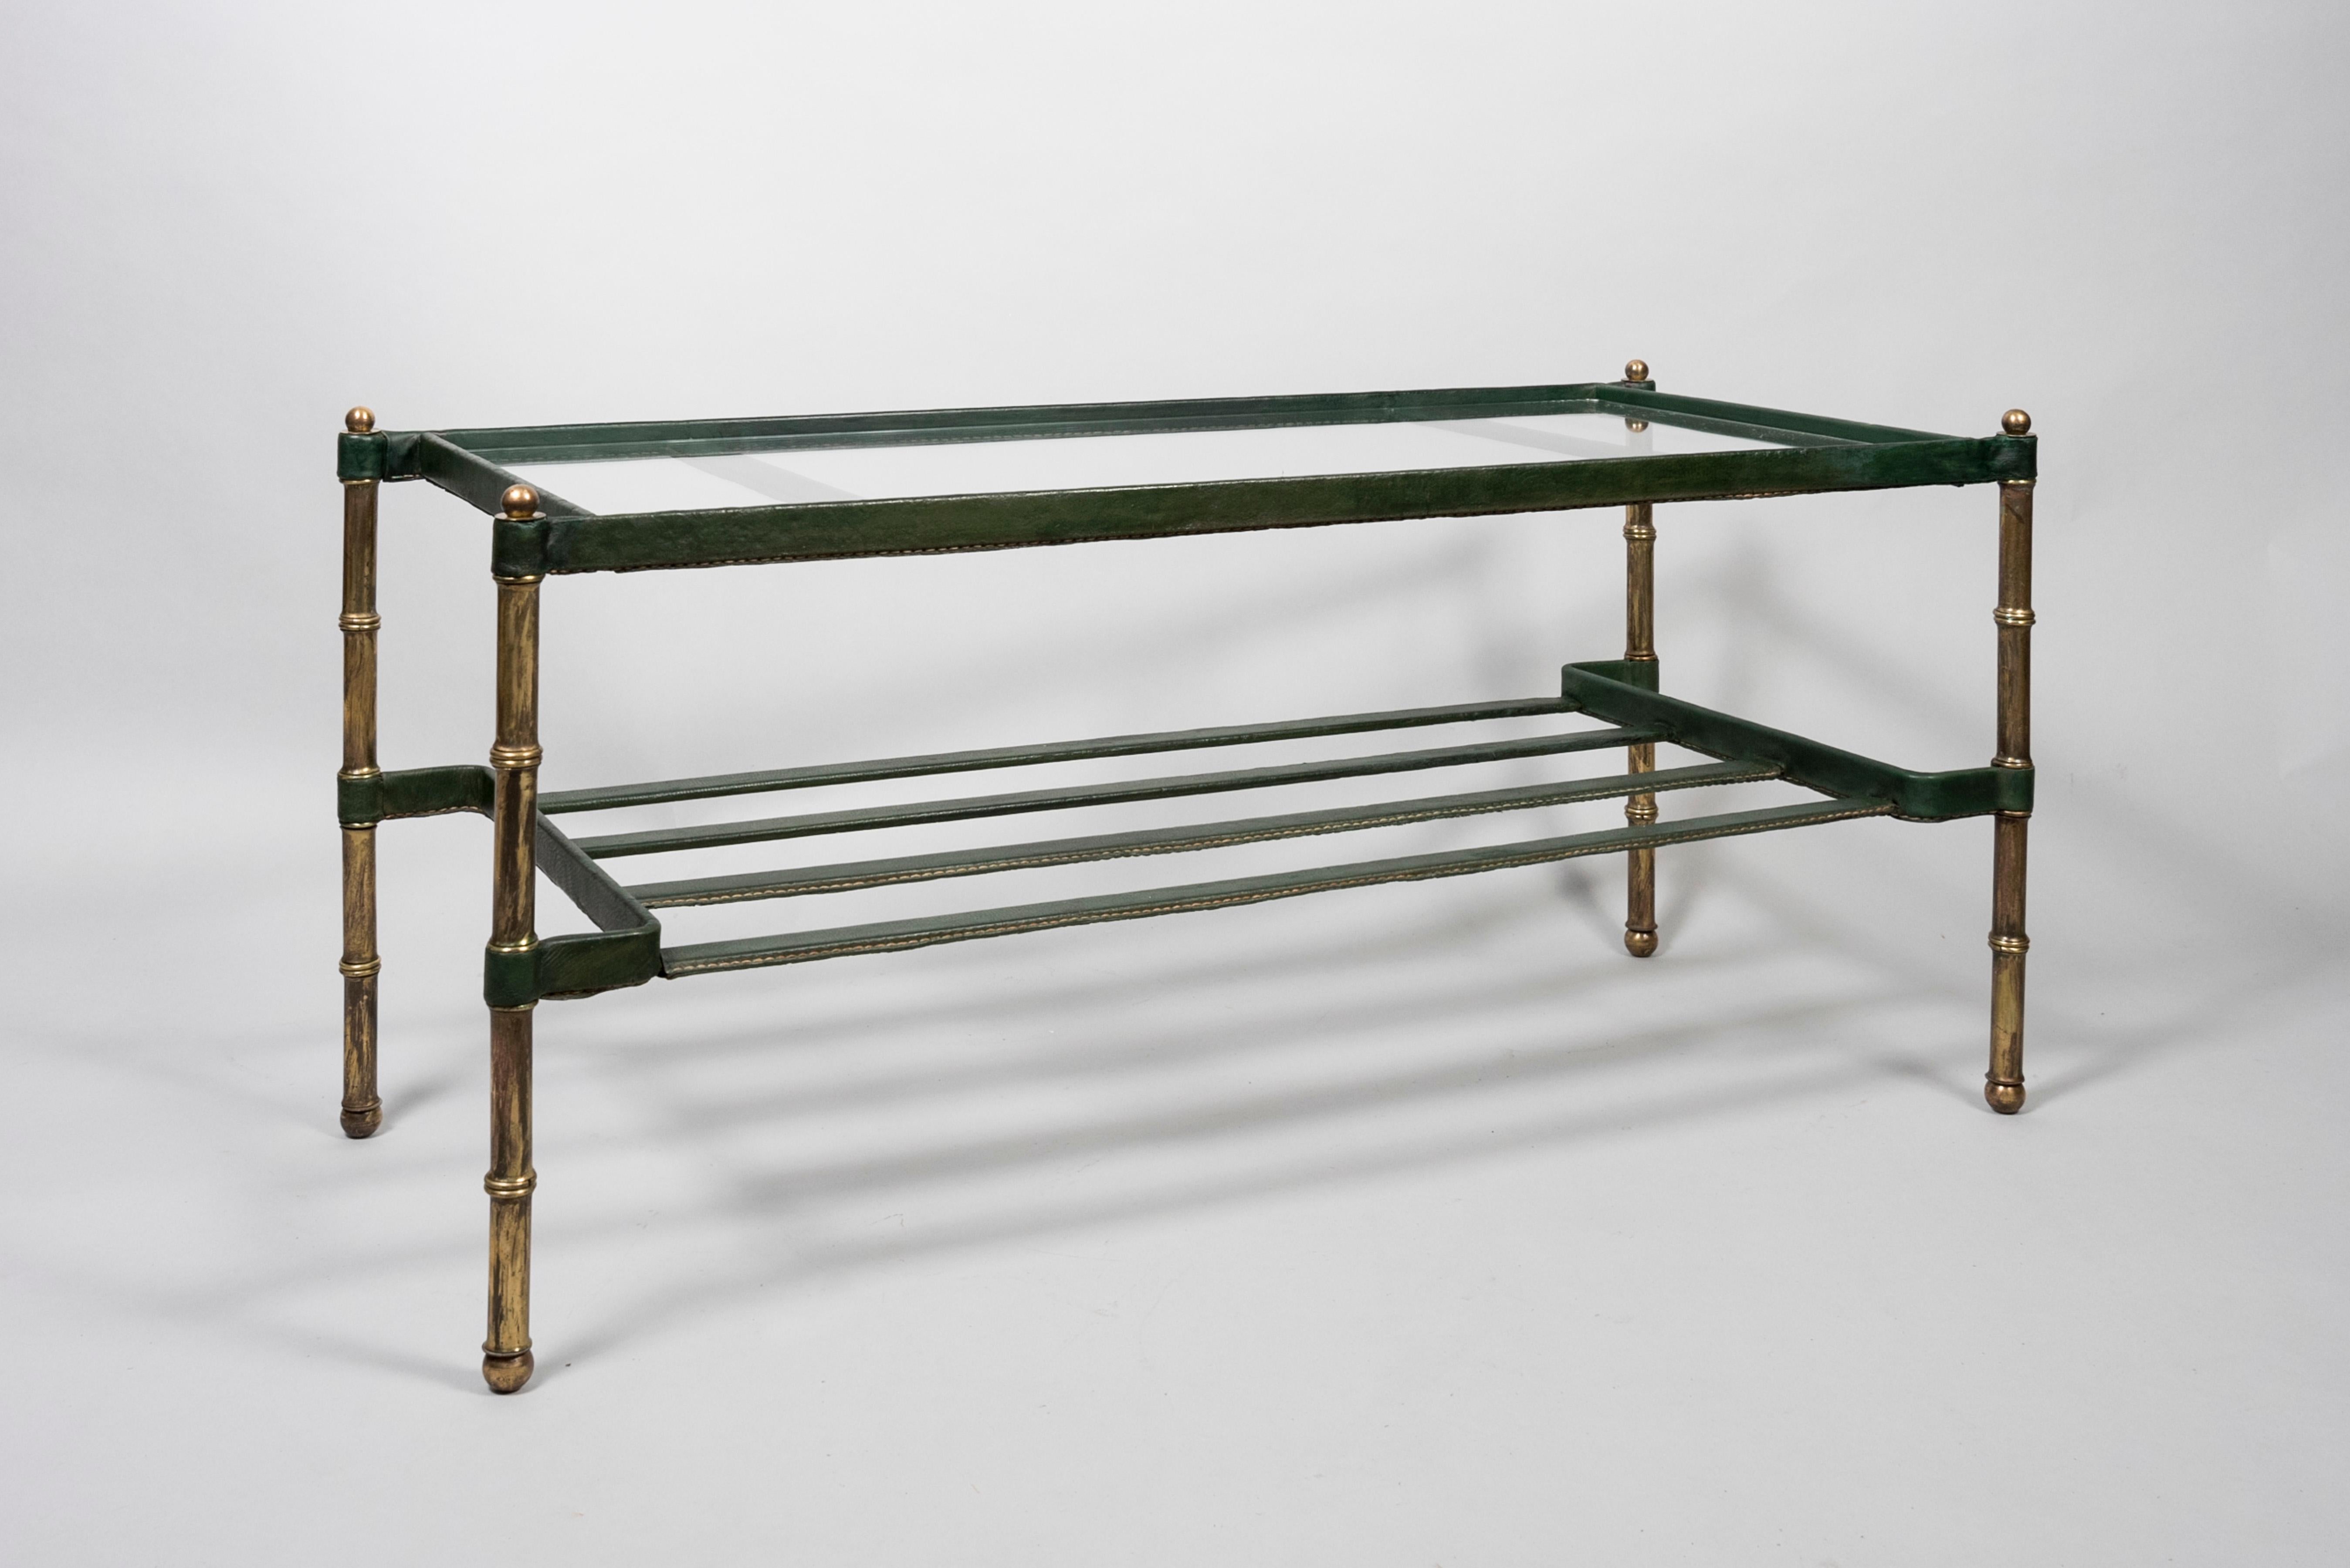 1950's Stitched green leather cocktail table by Jacques Adnet
Good overall condition.